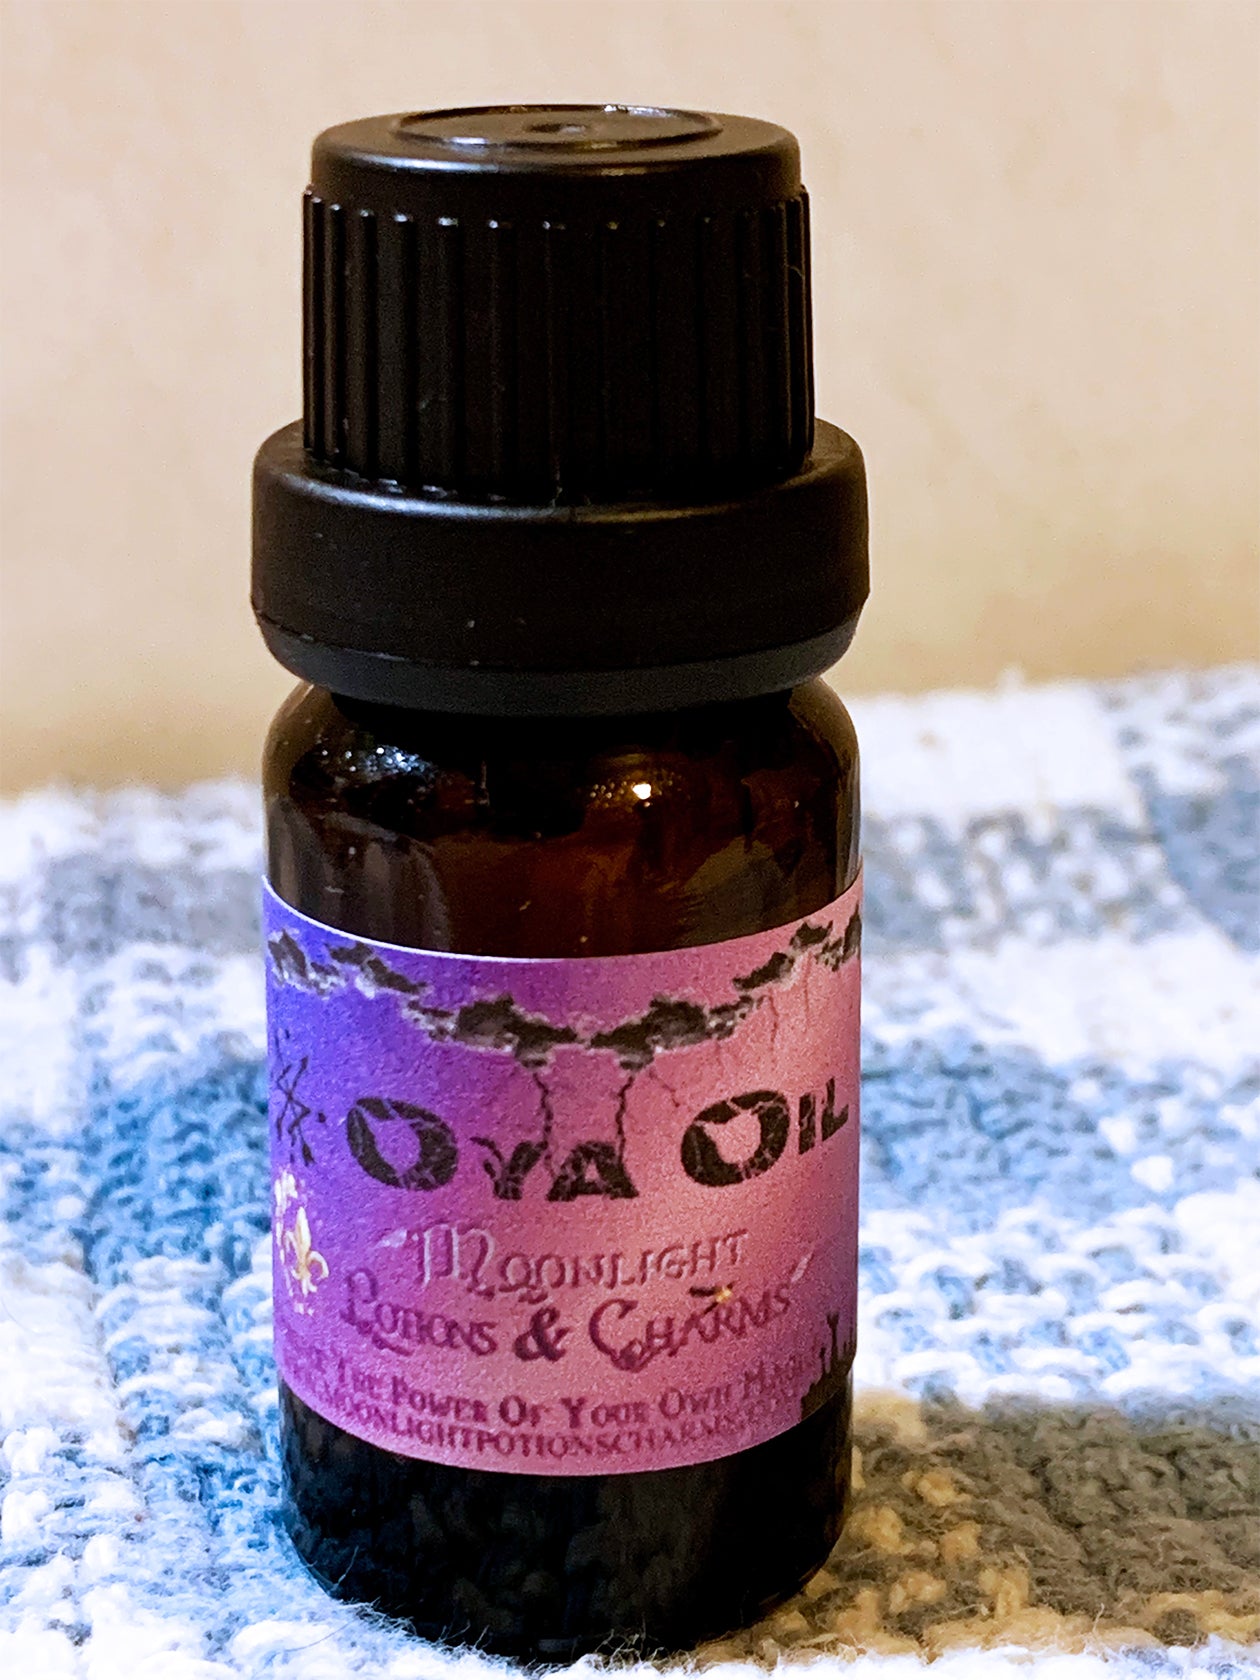 Oya Oil - Moonlight Potions & Charms